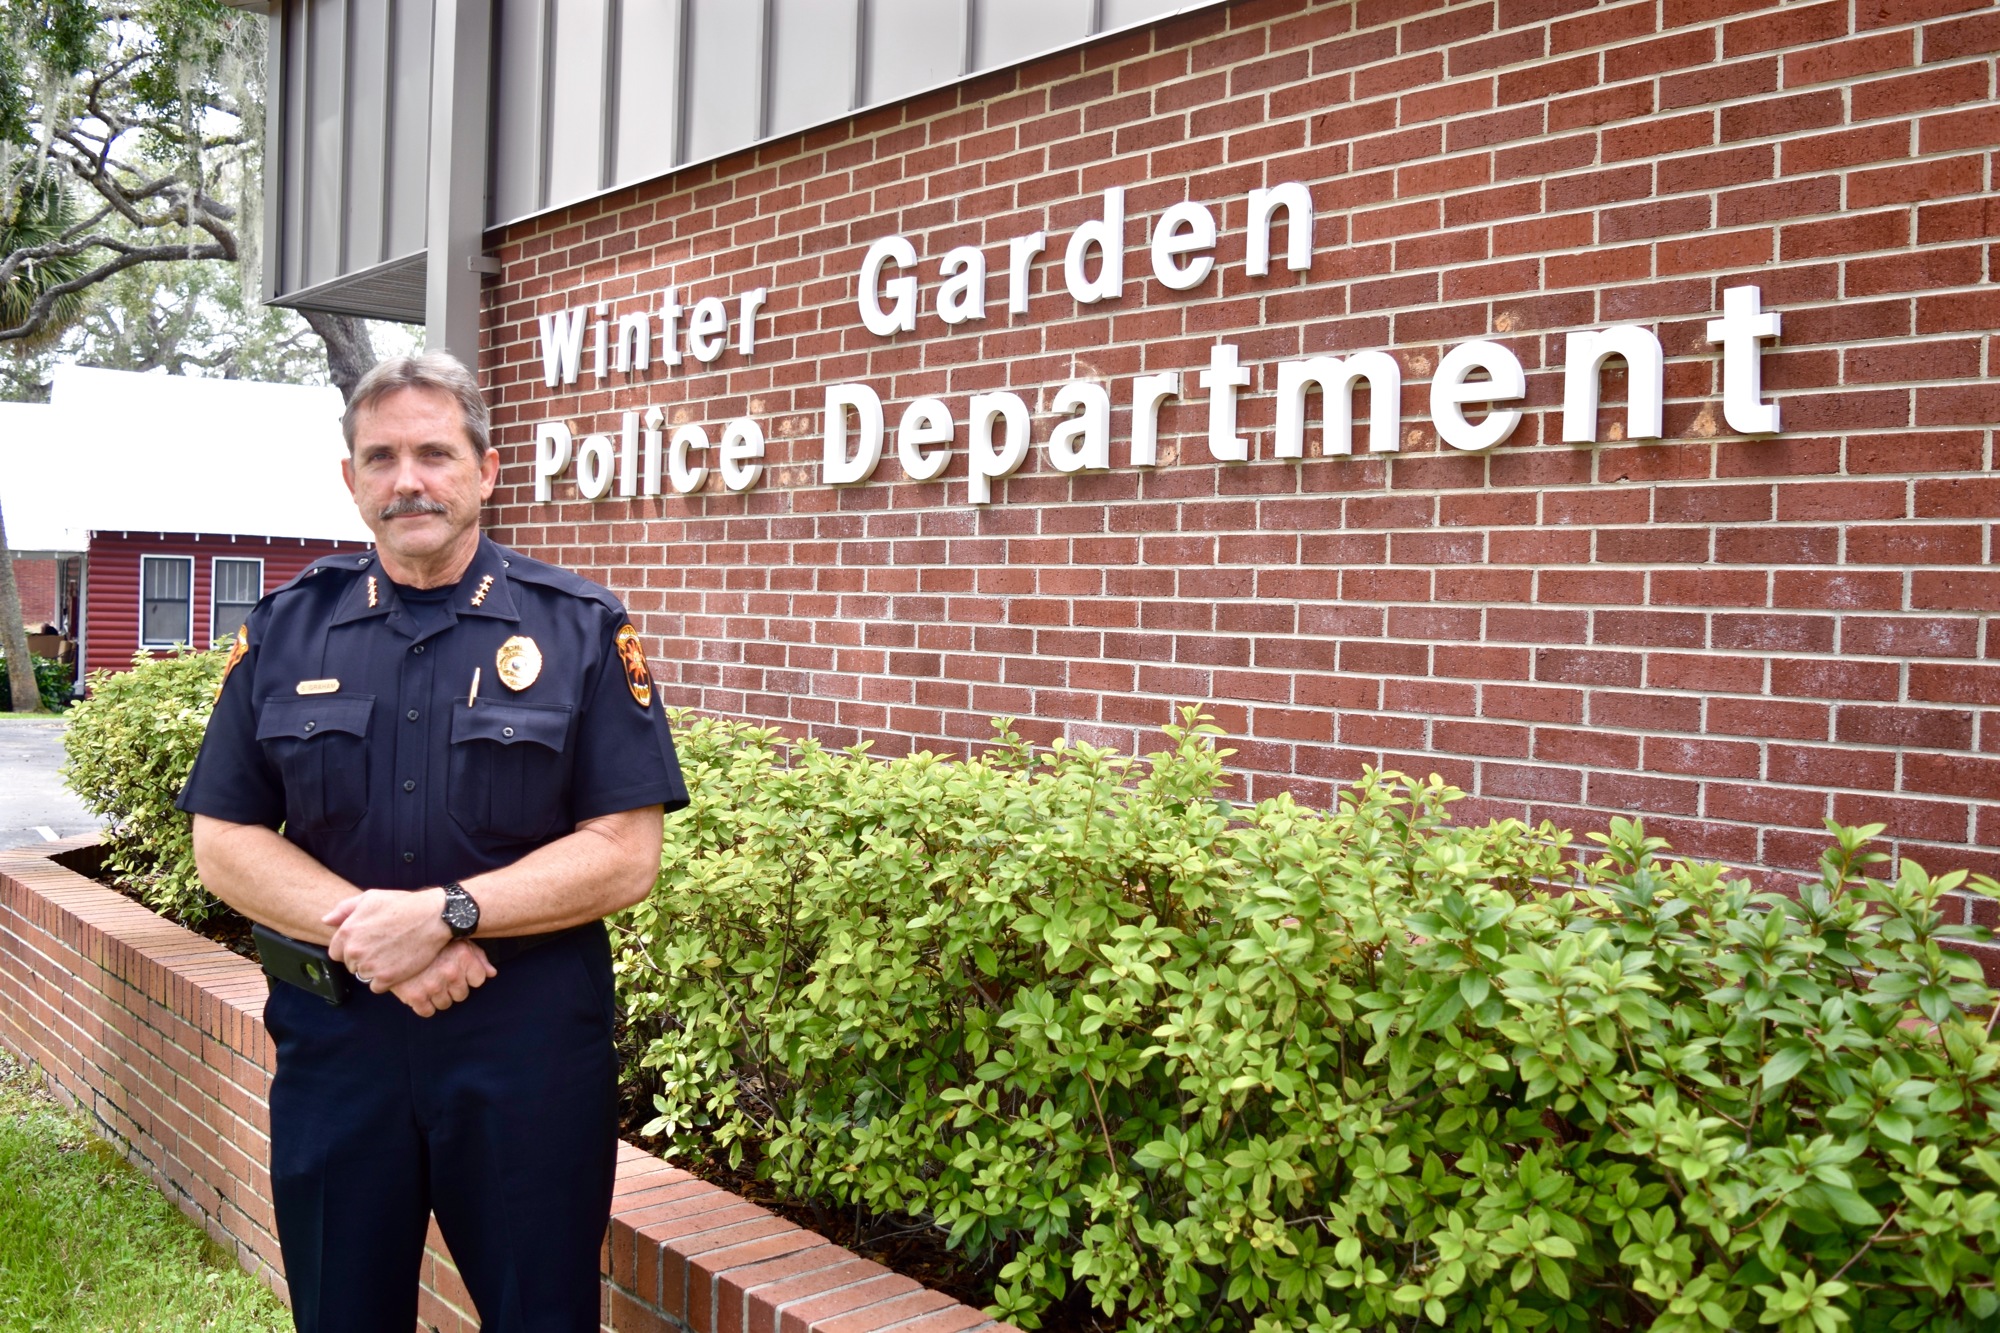 New Winter Garden Police Chief Steve Graham is ready to oversee his department and serve the city.